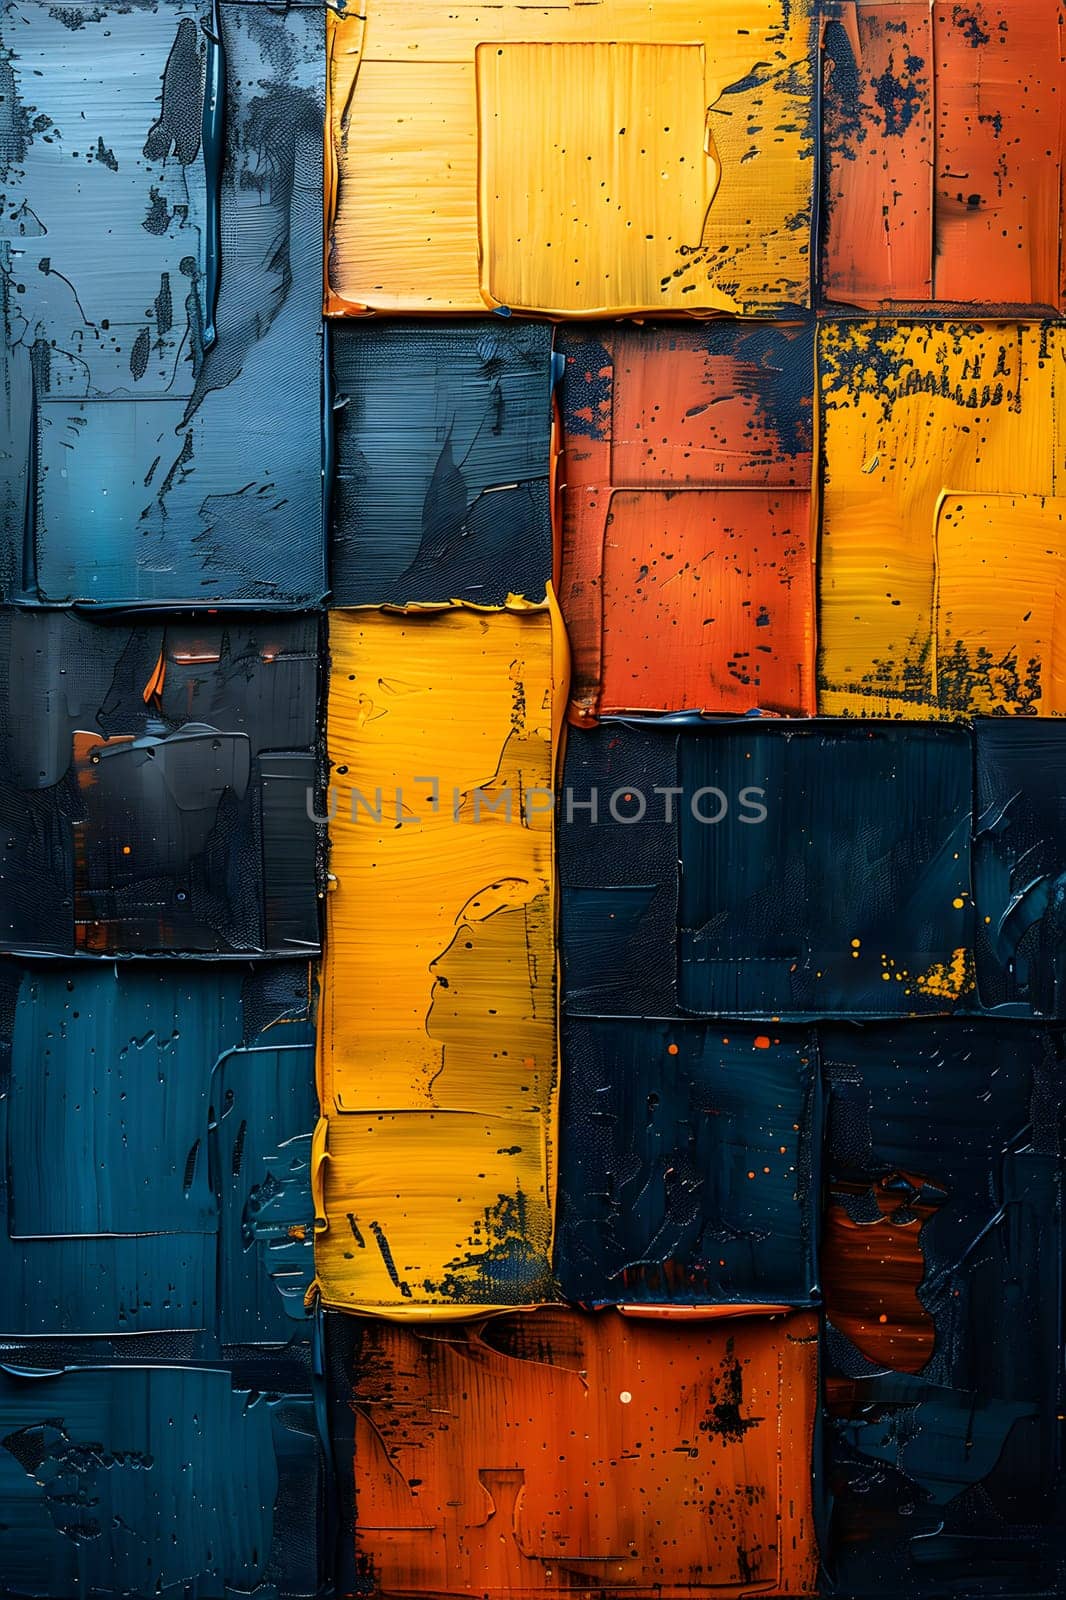 A variety of colorful rectangles, including brown, orange, amber, and electric blue, are stacked to create an artistic fixture with tints and shades of yellow paint